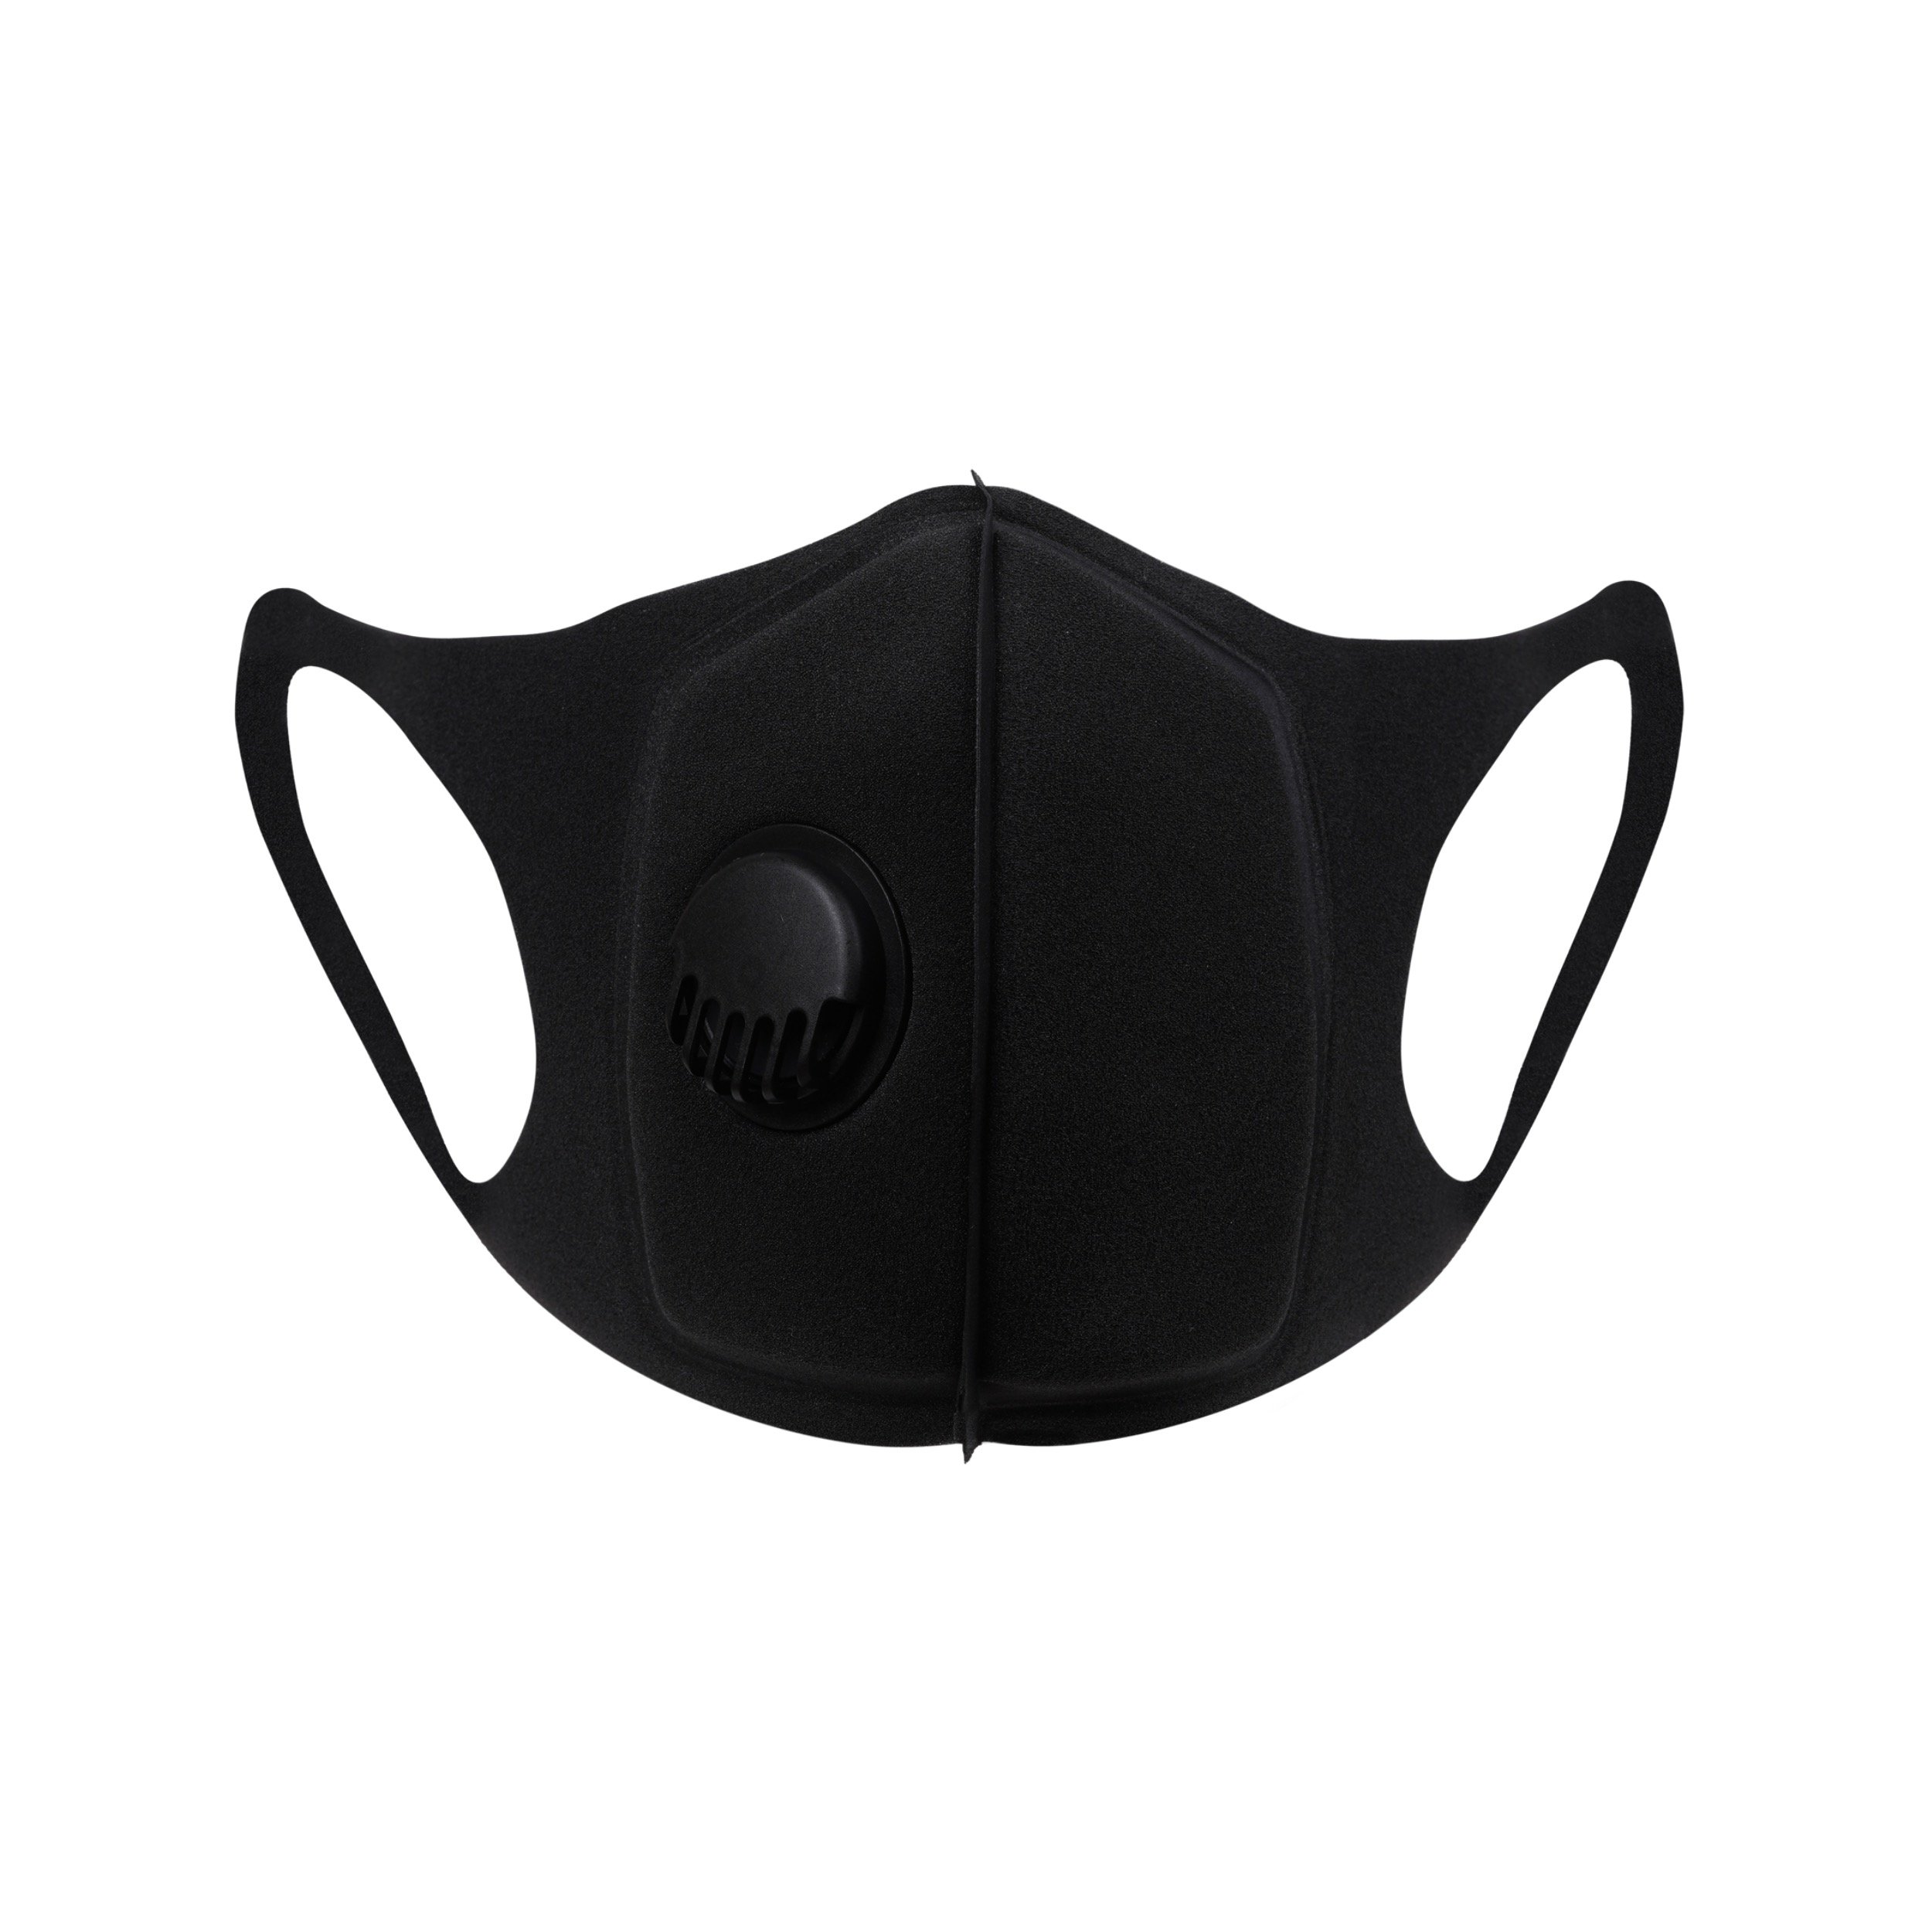 Fashion Respiratory Face Mask With Valve